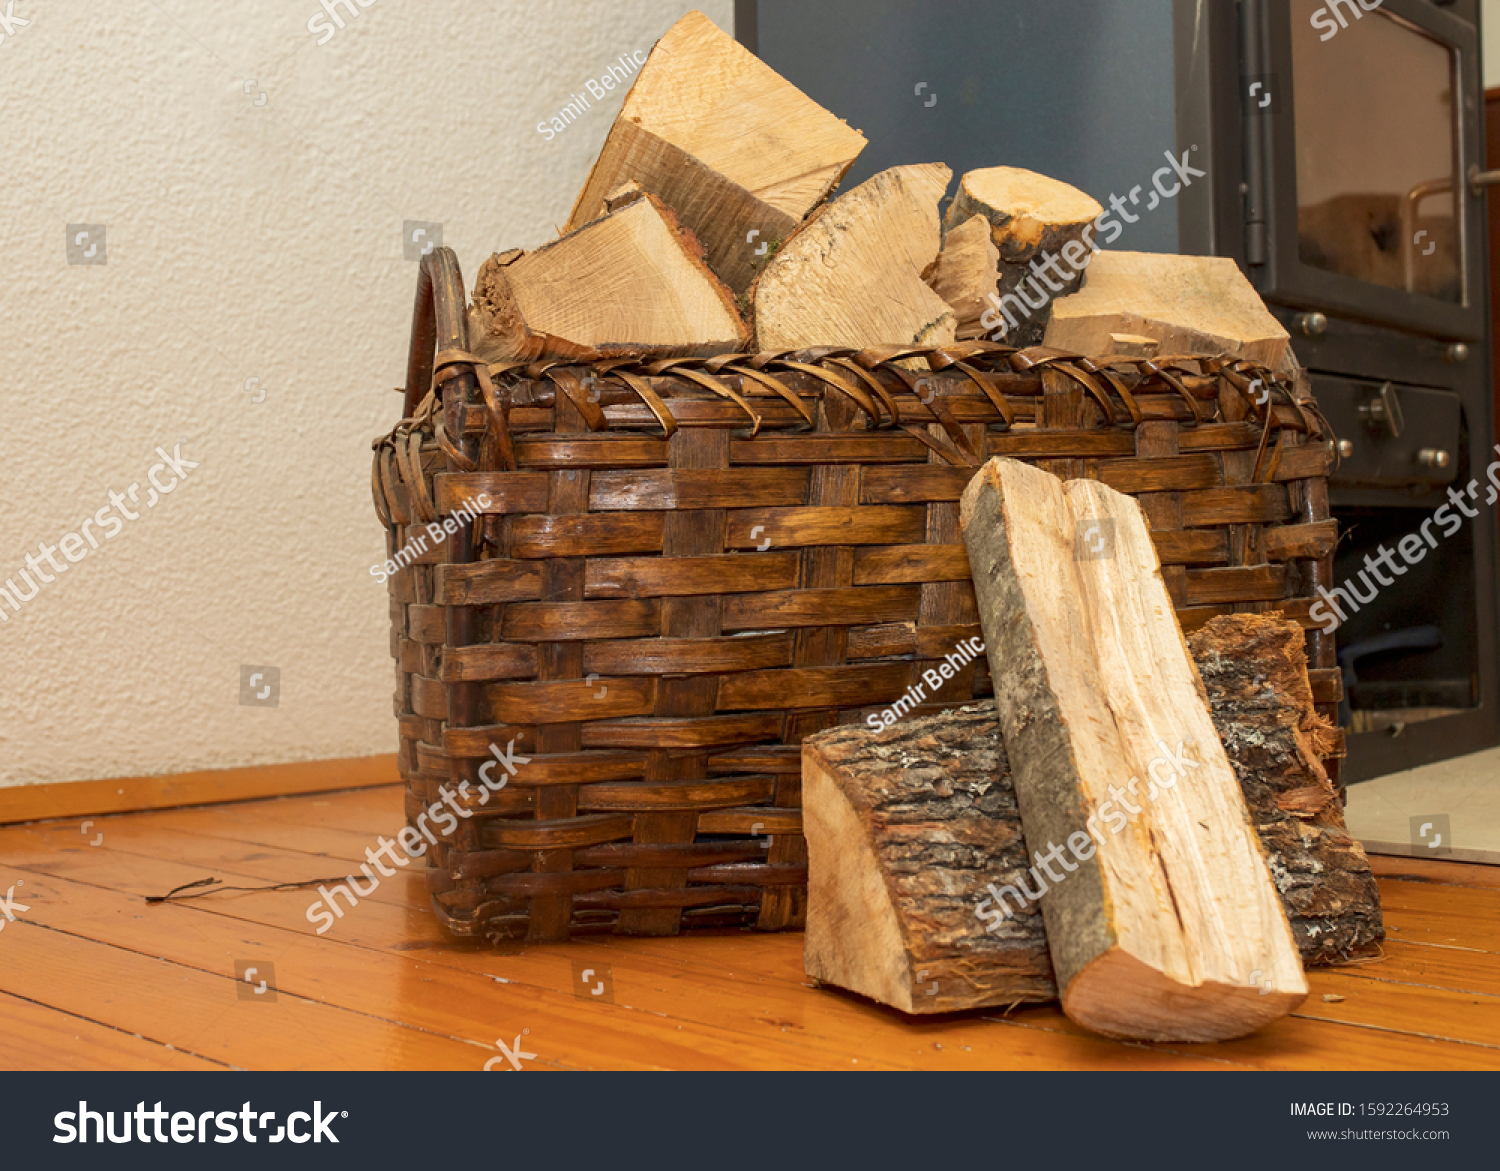 
Basket with wood for fireplace and and fireplace in the background #1592264953